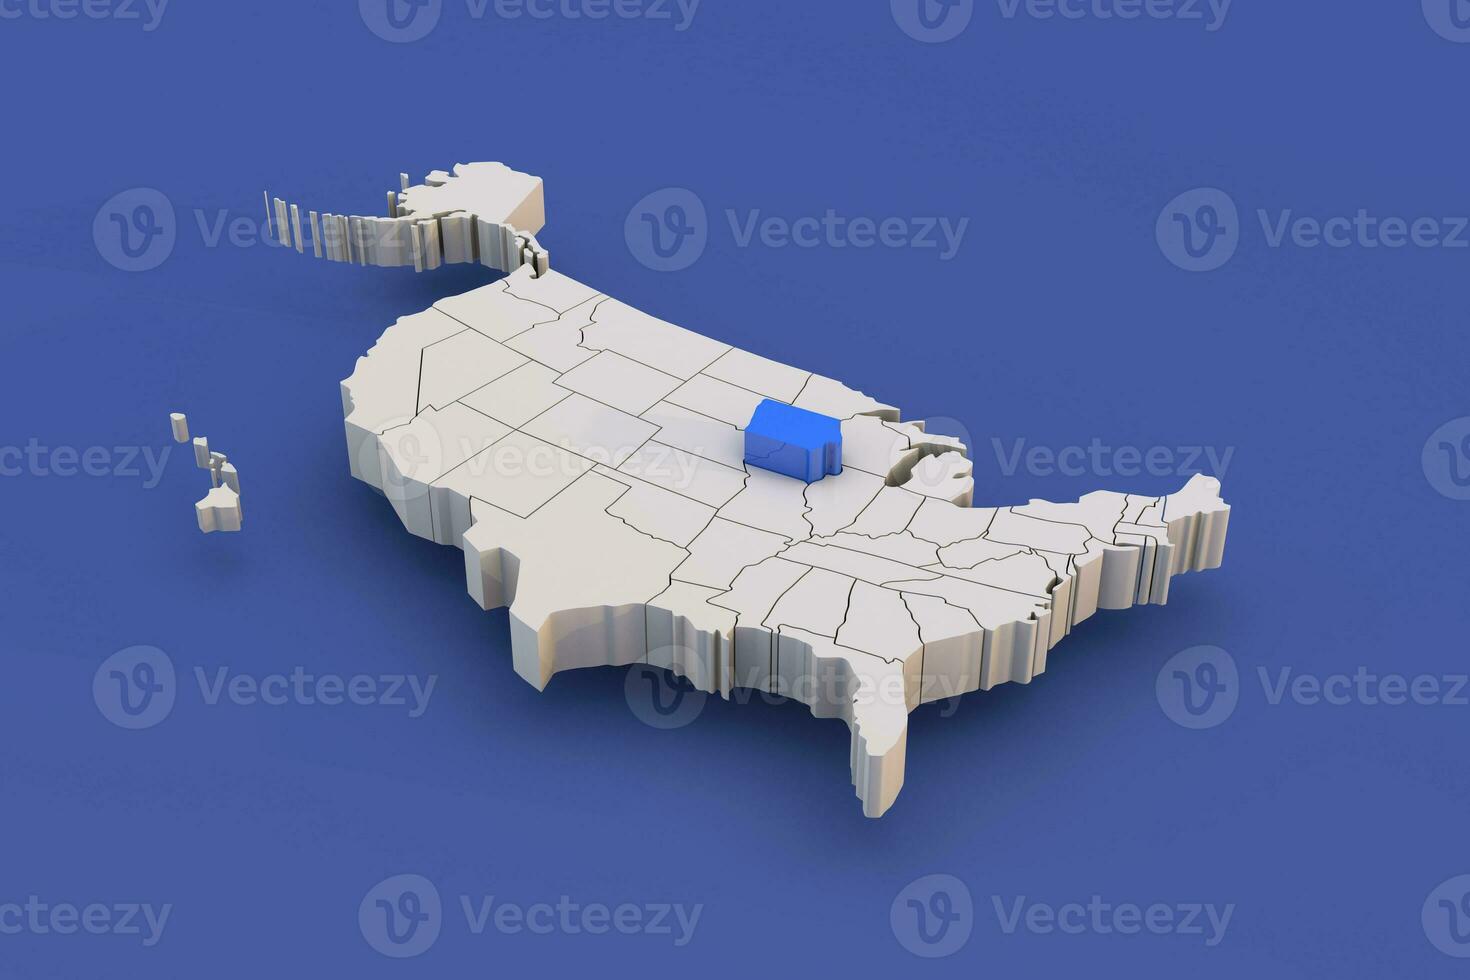 Iowa state of USA map with white states a 3D united states of america map photo